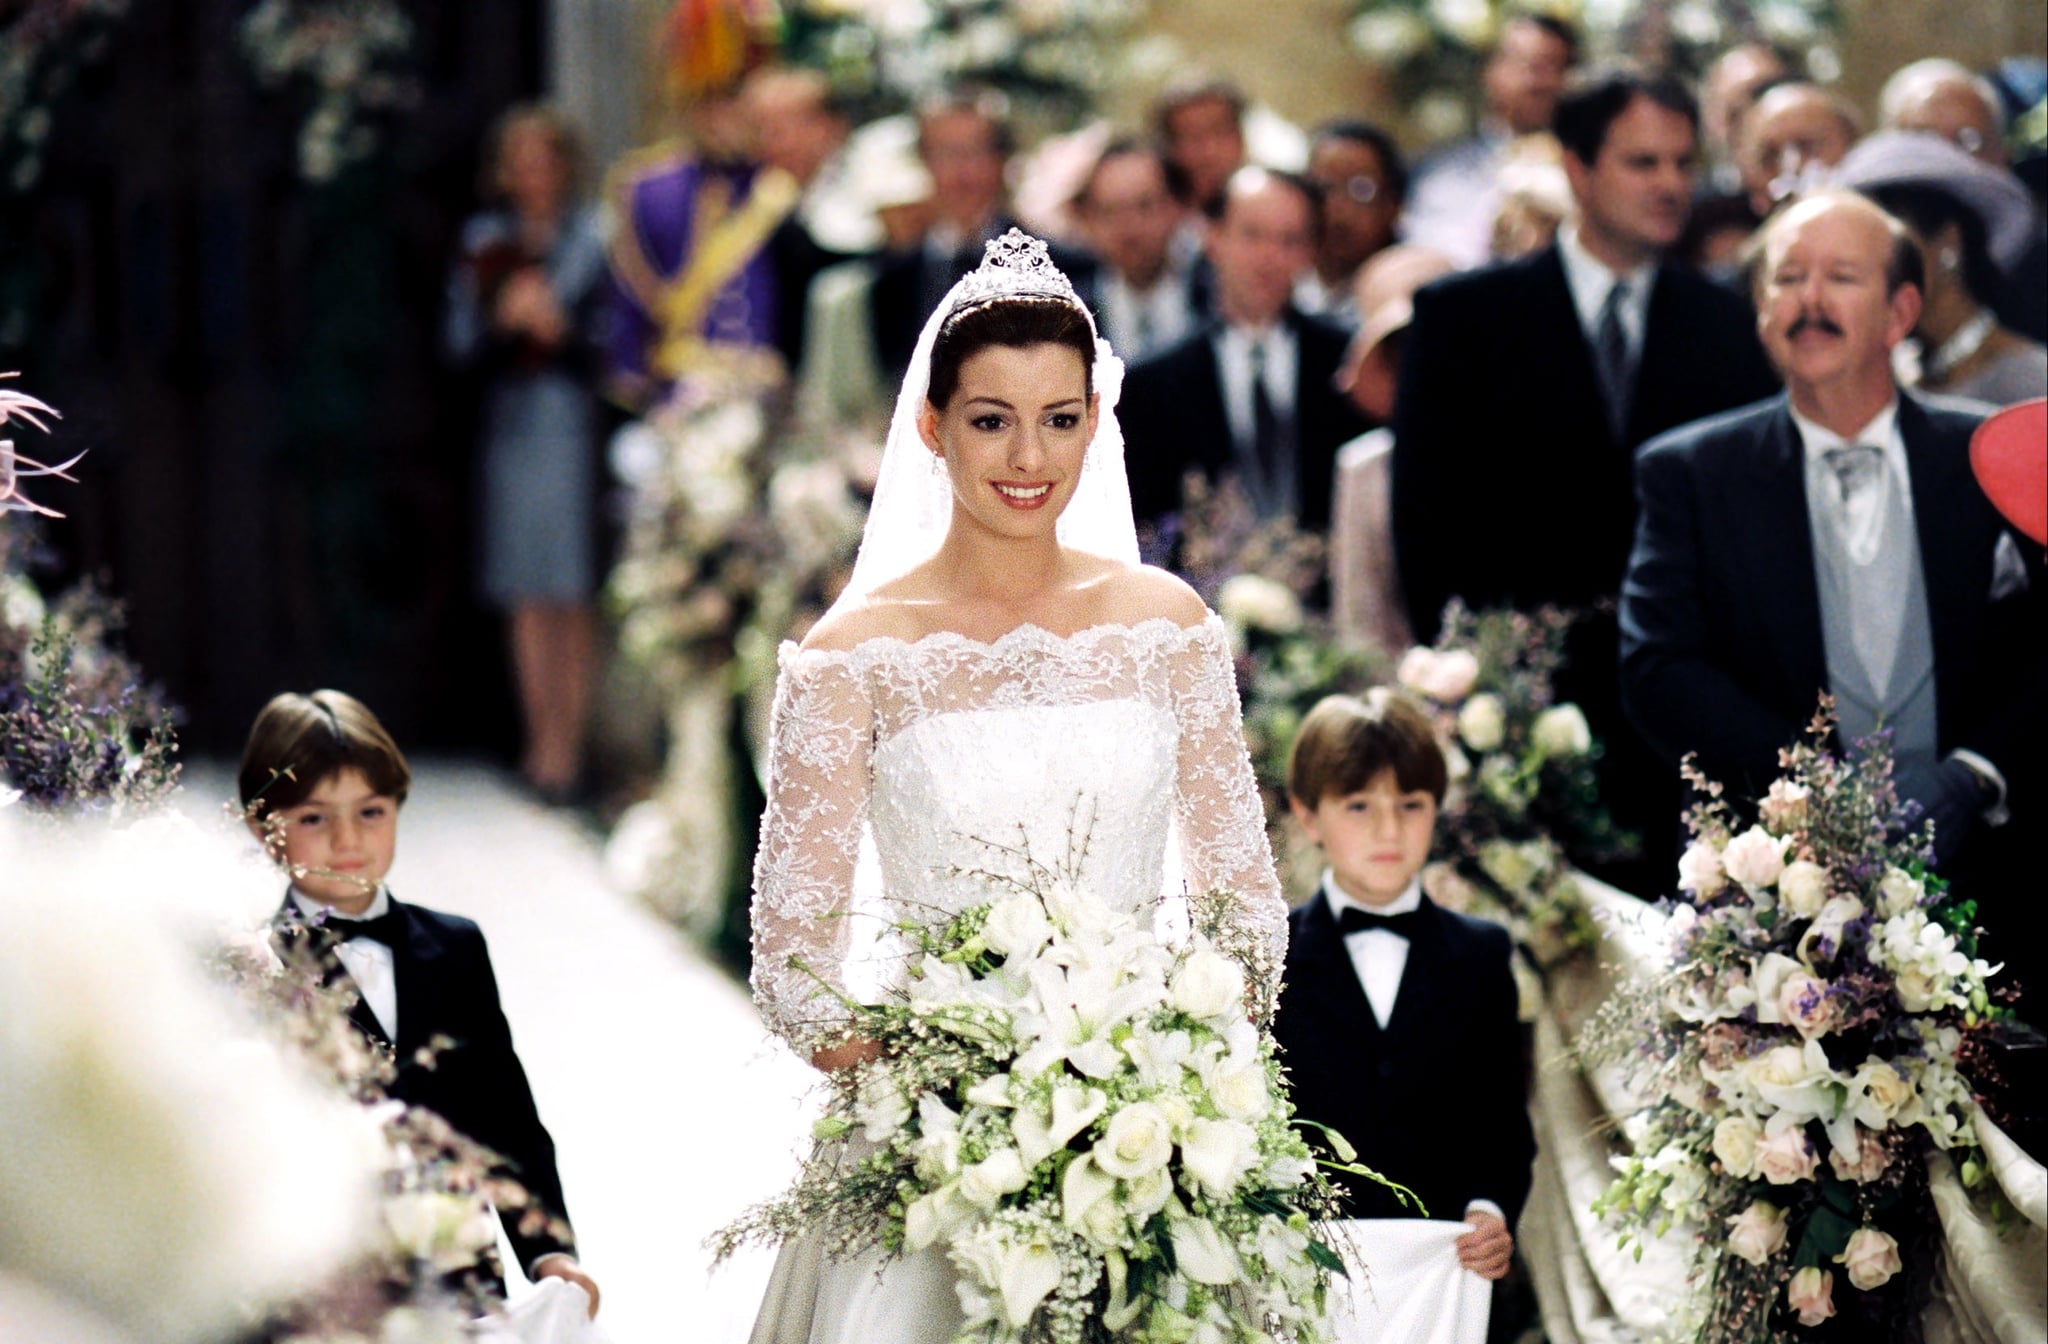 Top Princess Diaries 2 Wedding Dress of the decade Check it out now 